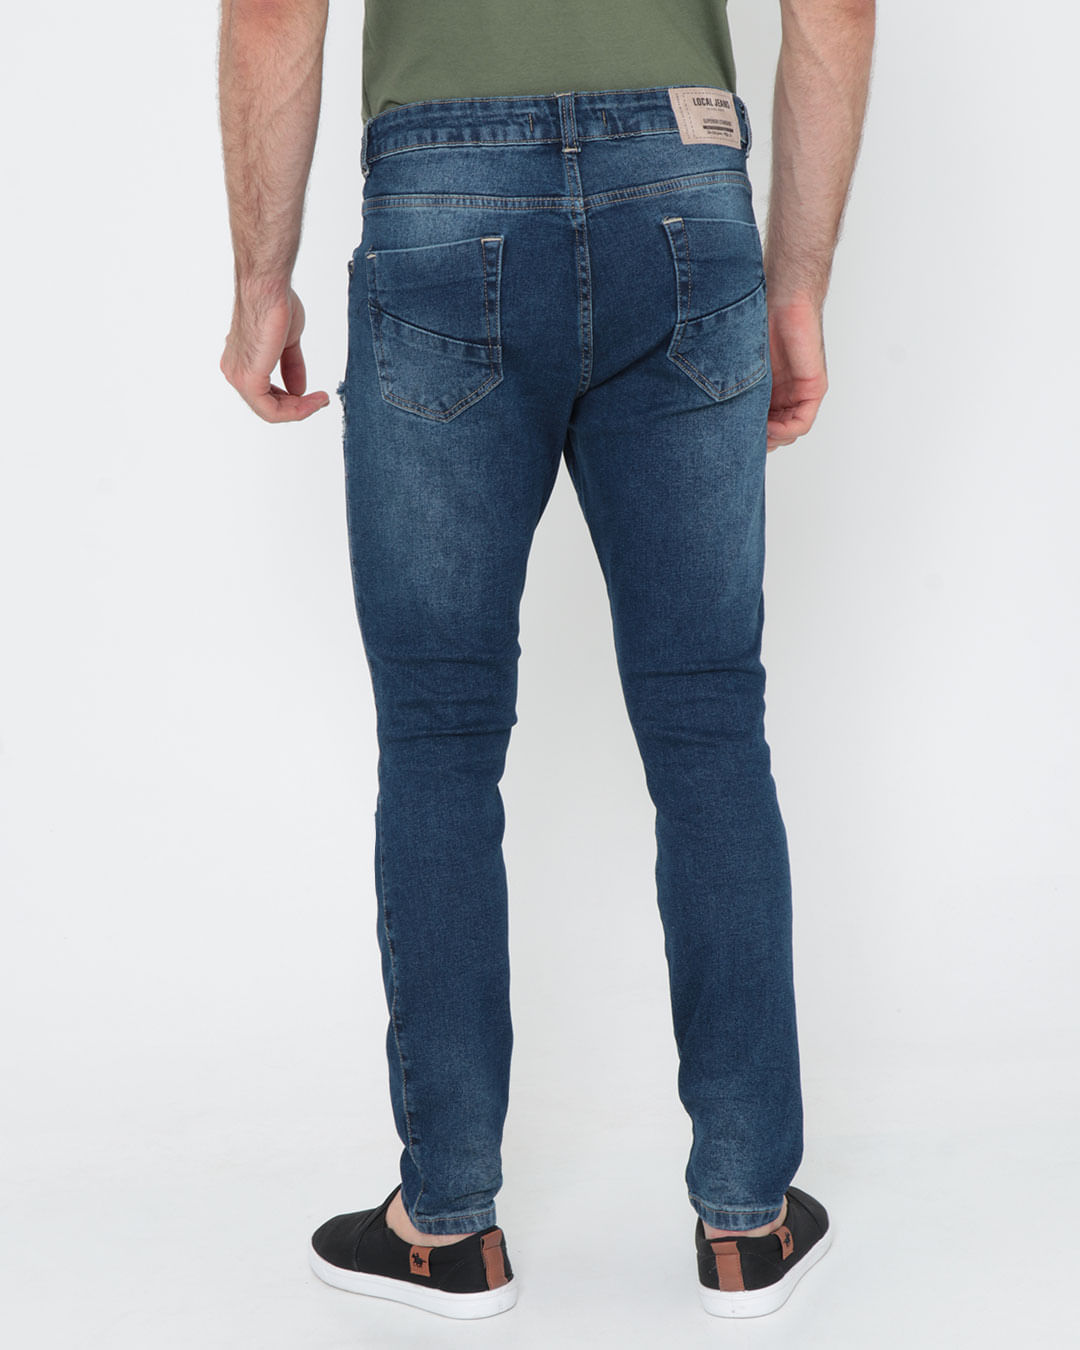 Calca-Jeans-Masculina-Cropped-Destroyed-Azul-